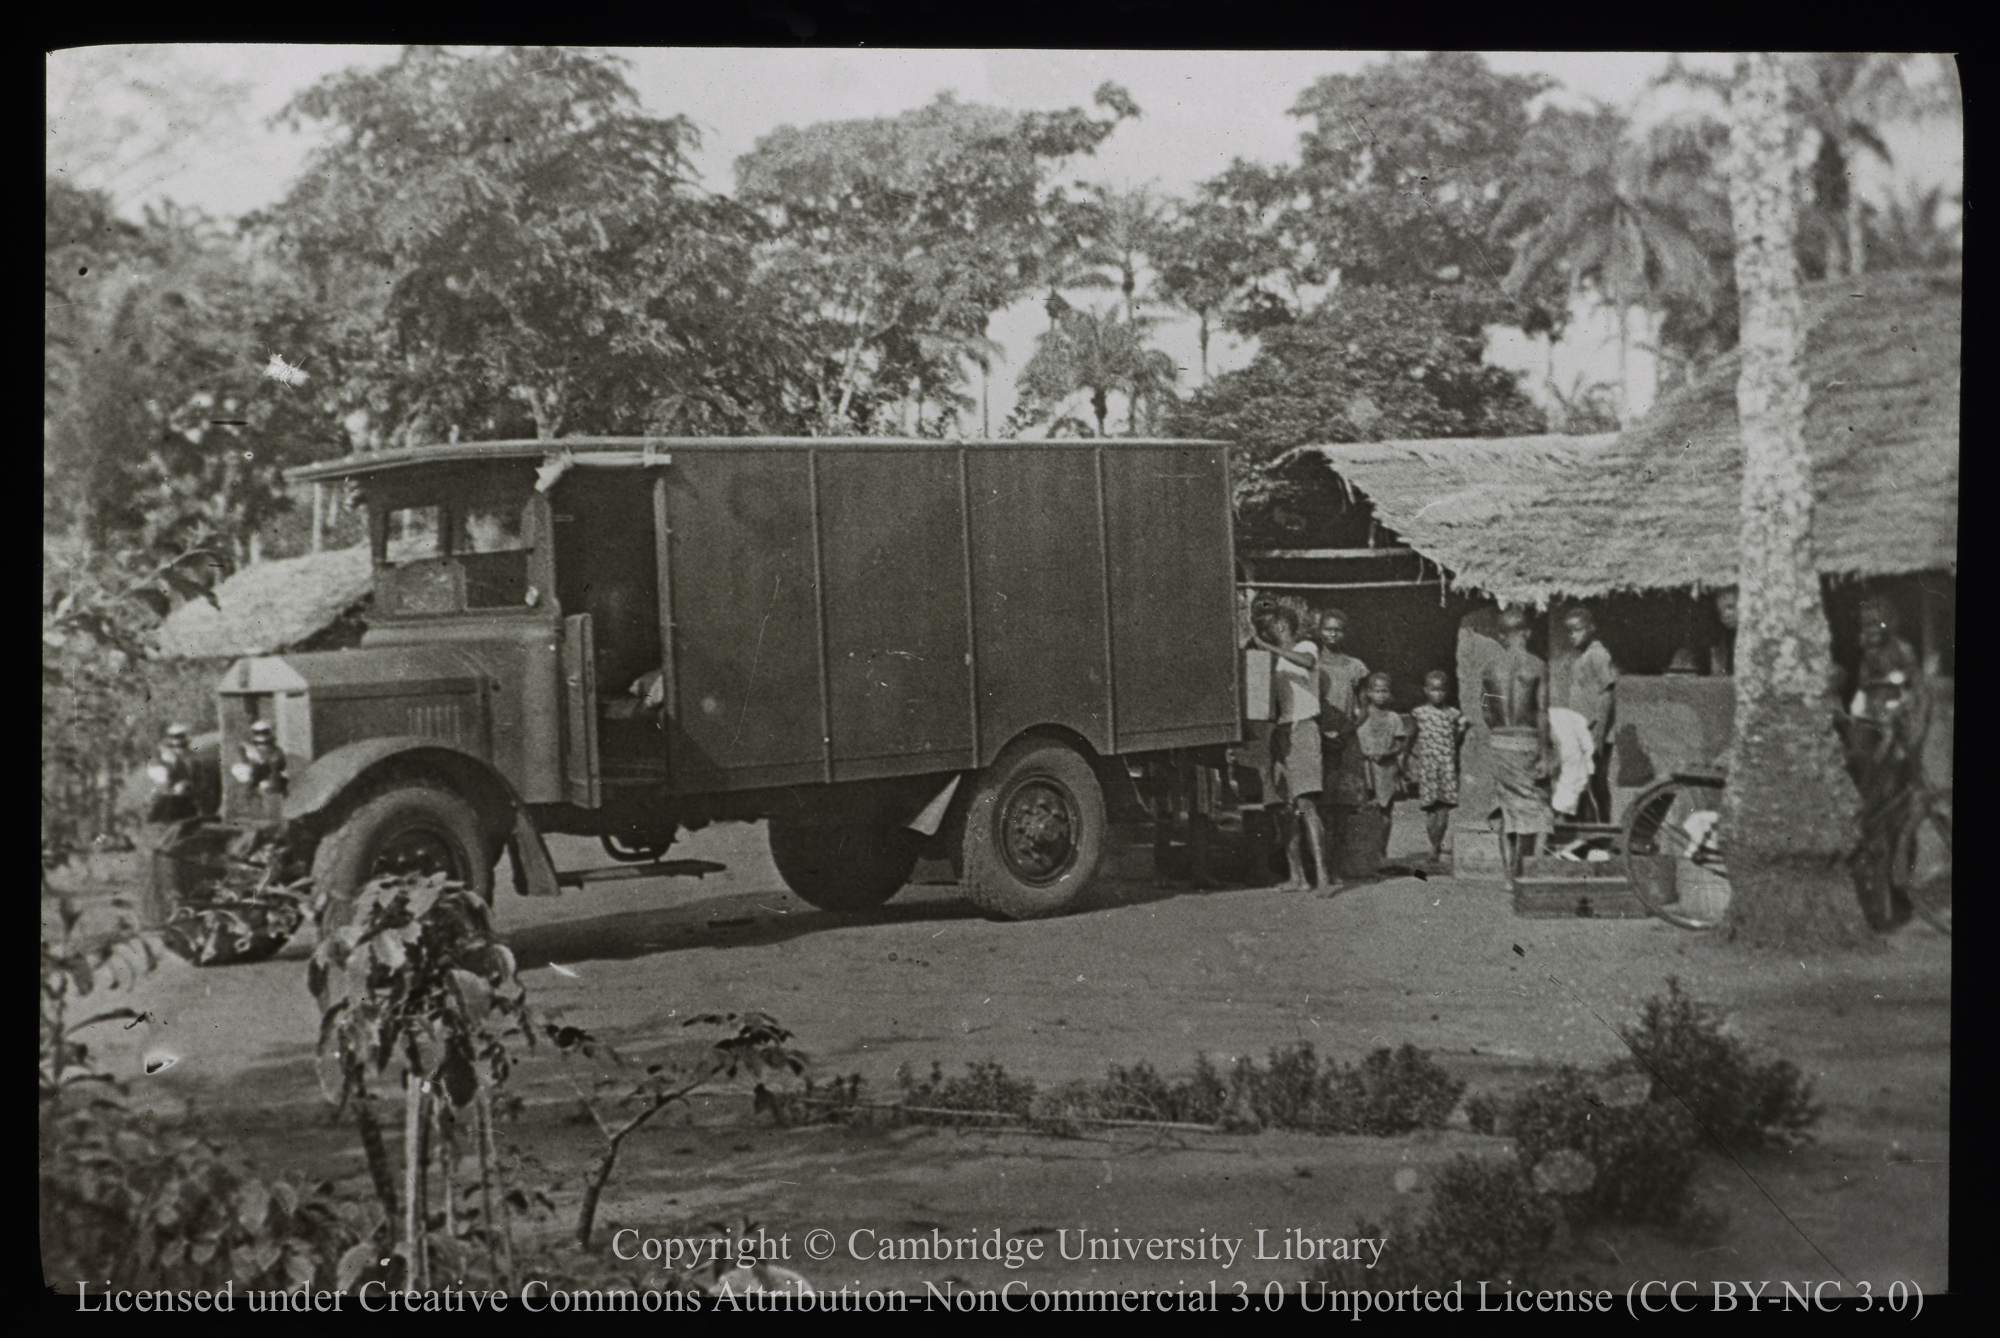 Mission lorry at Aba, 1920 - 1940